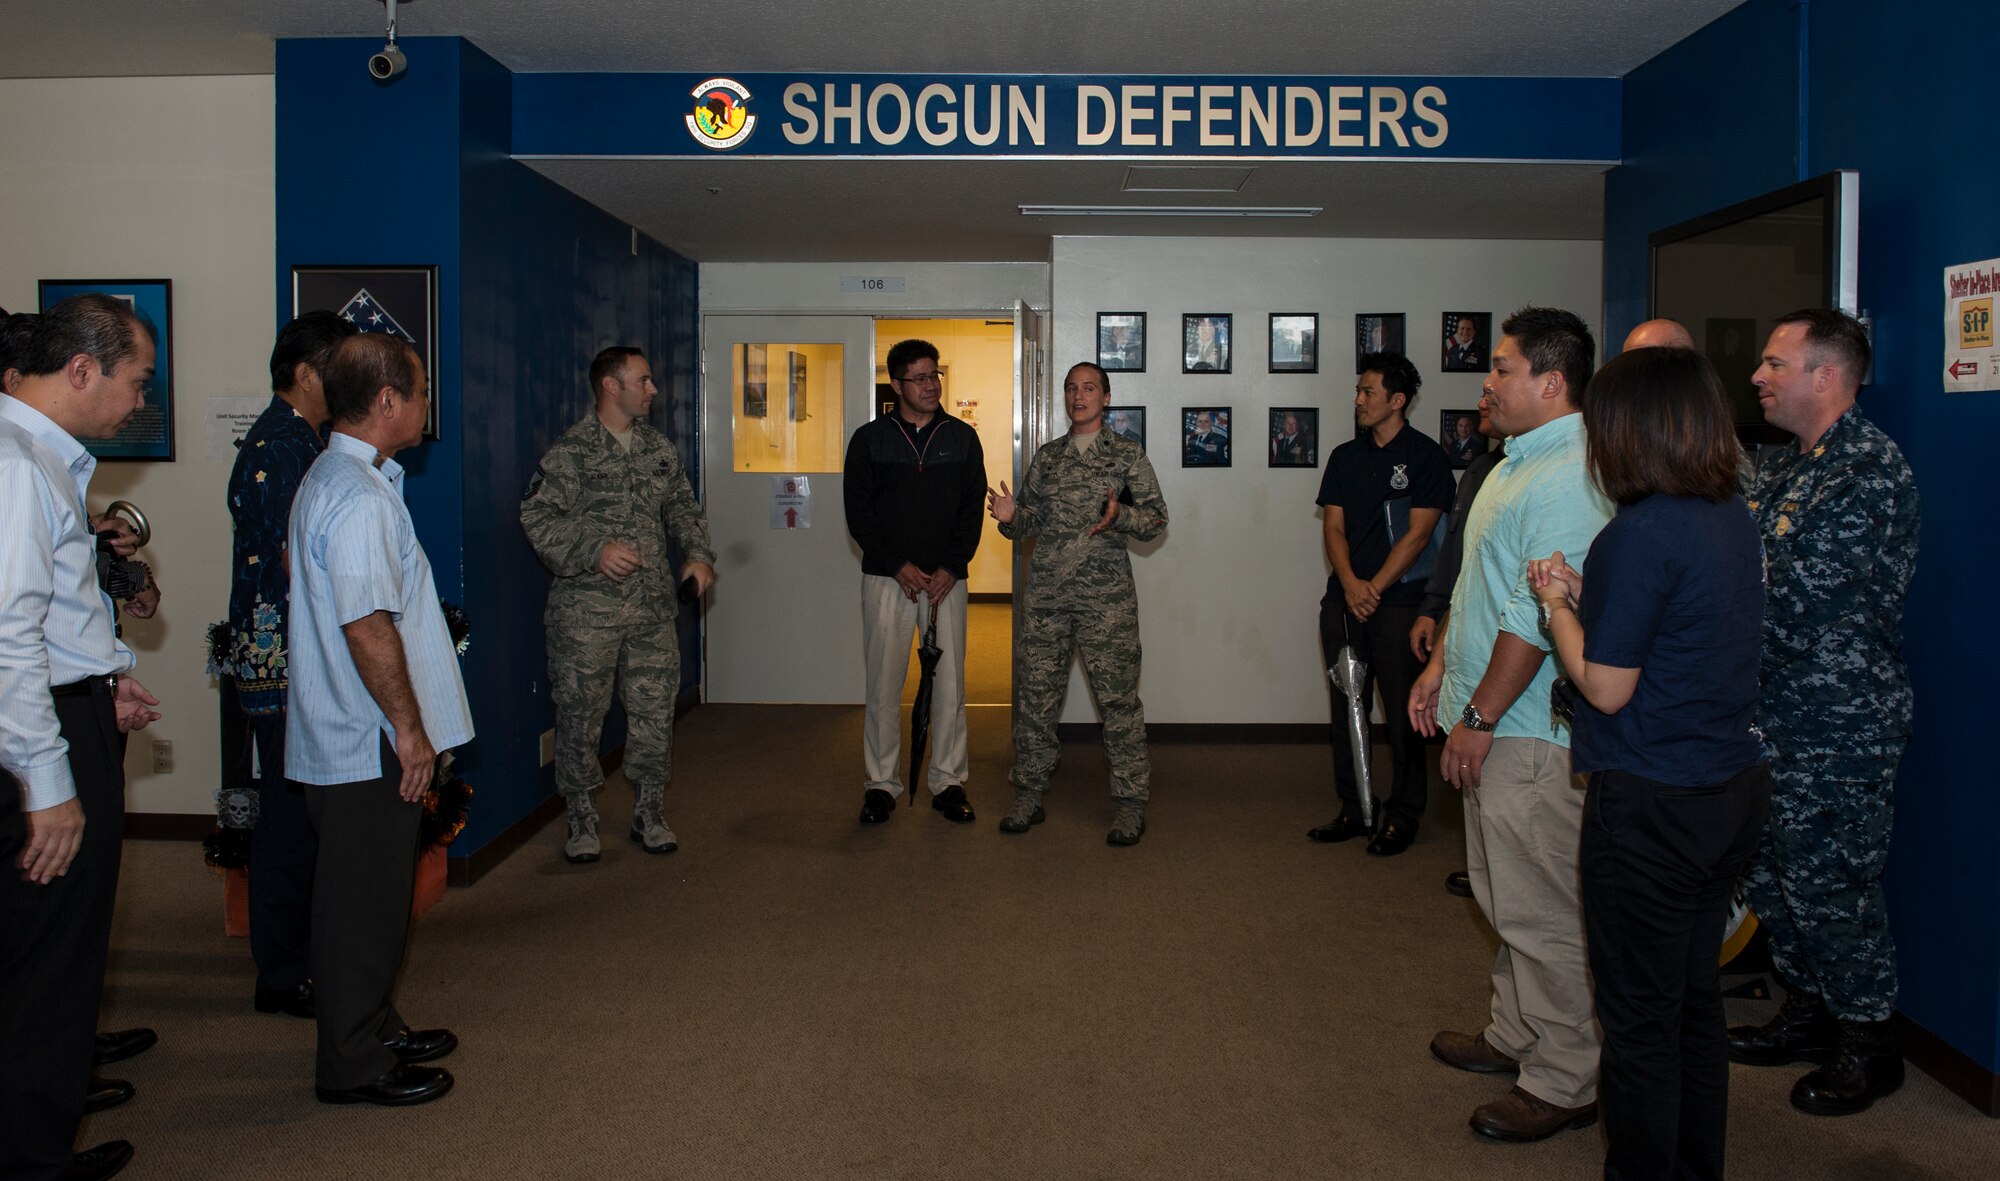 U.S. Air Force Lt. Col. Sarah Babbitt, 18th Security Forces Squadron commander, briefs Okinawa Police Station members during the Inaugural Law Enforcement Officer Exchange Oct. 22, 2015, on Kadena Air Base, Japan. Babbitt spoke about the importance of maintaining healthy relationships with the Okinawan police to maximize the protection of island residents. (U.S. Air Force photo by Airman 1st Class Lynette M. Rolen)